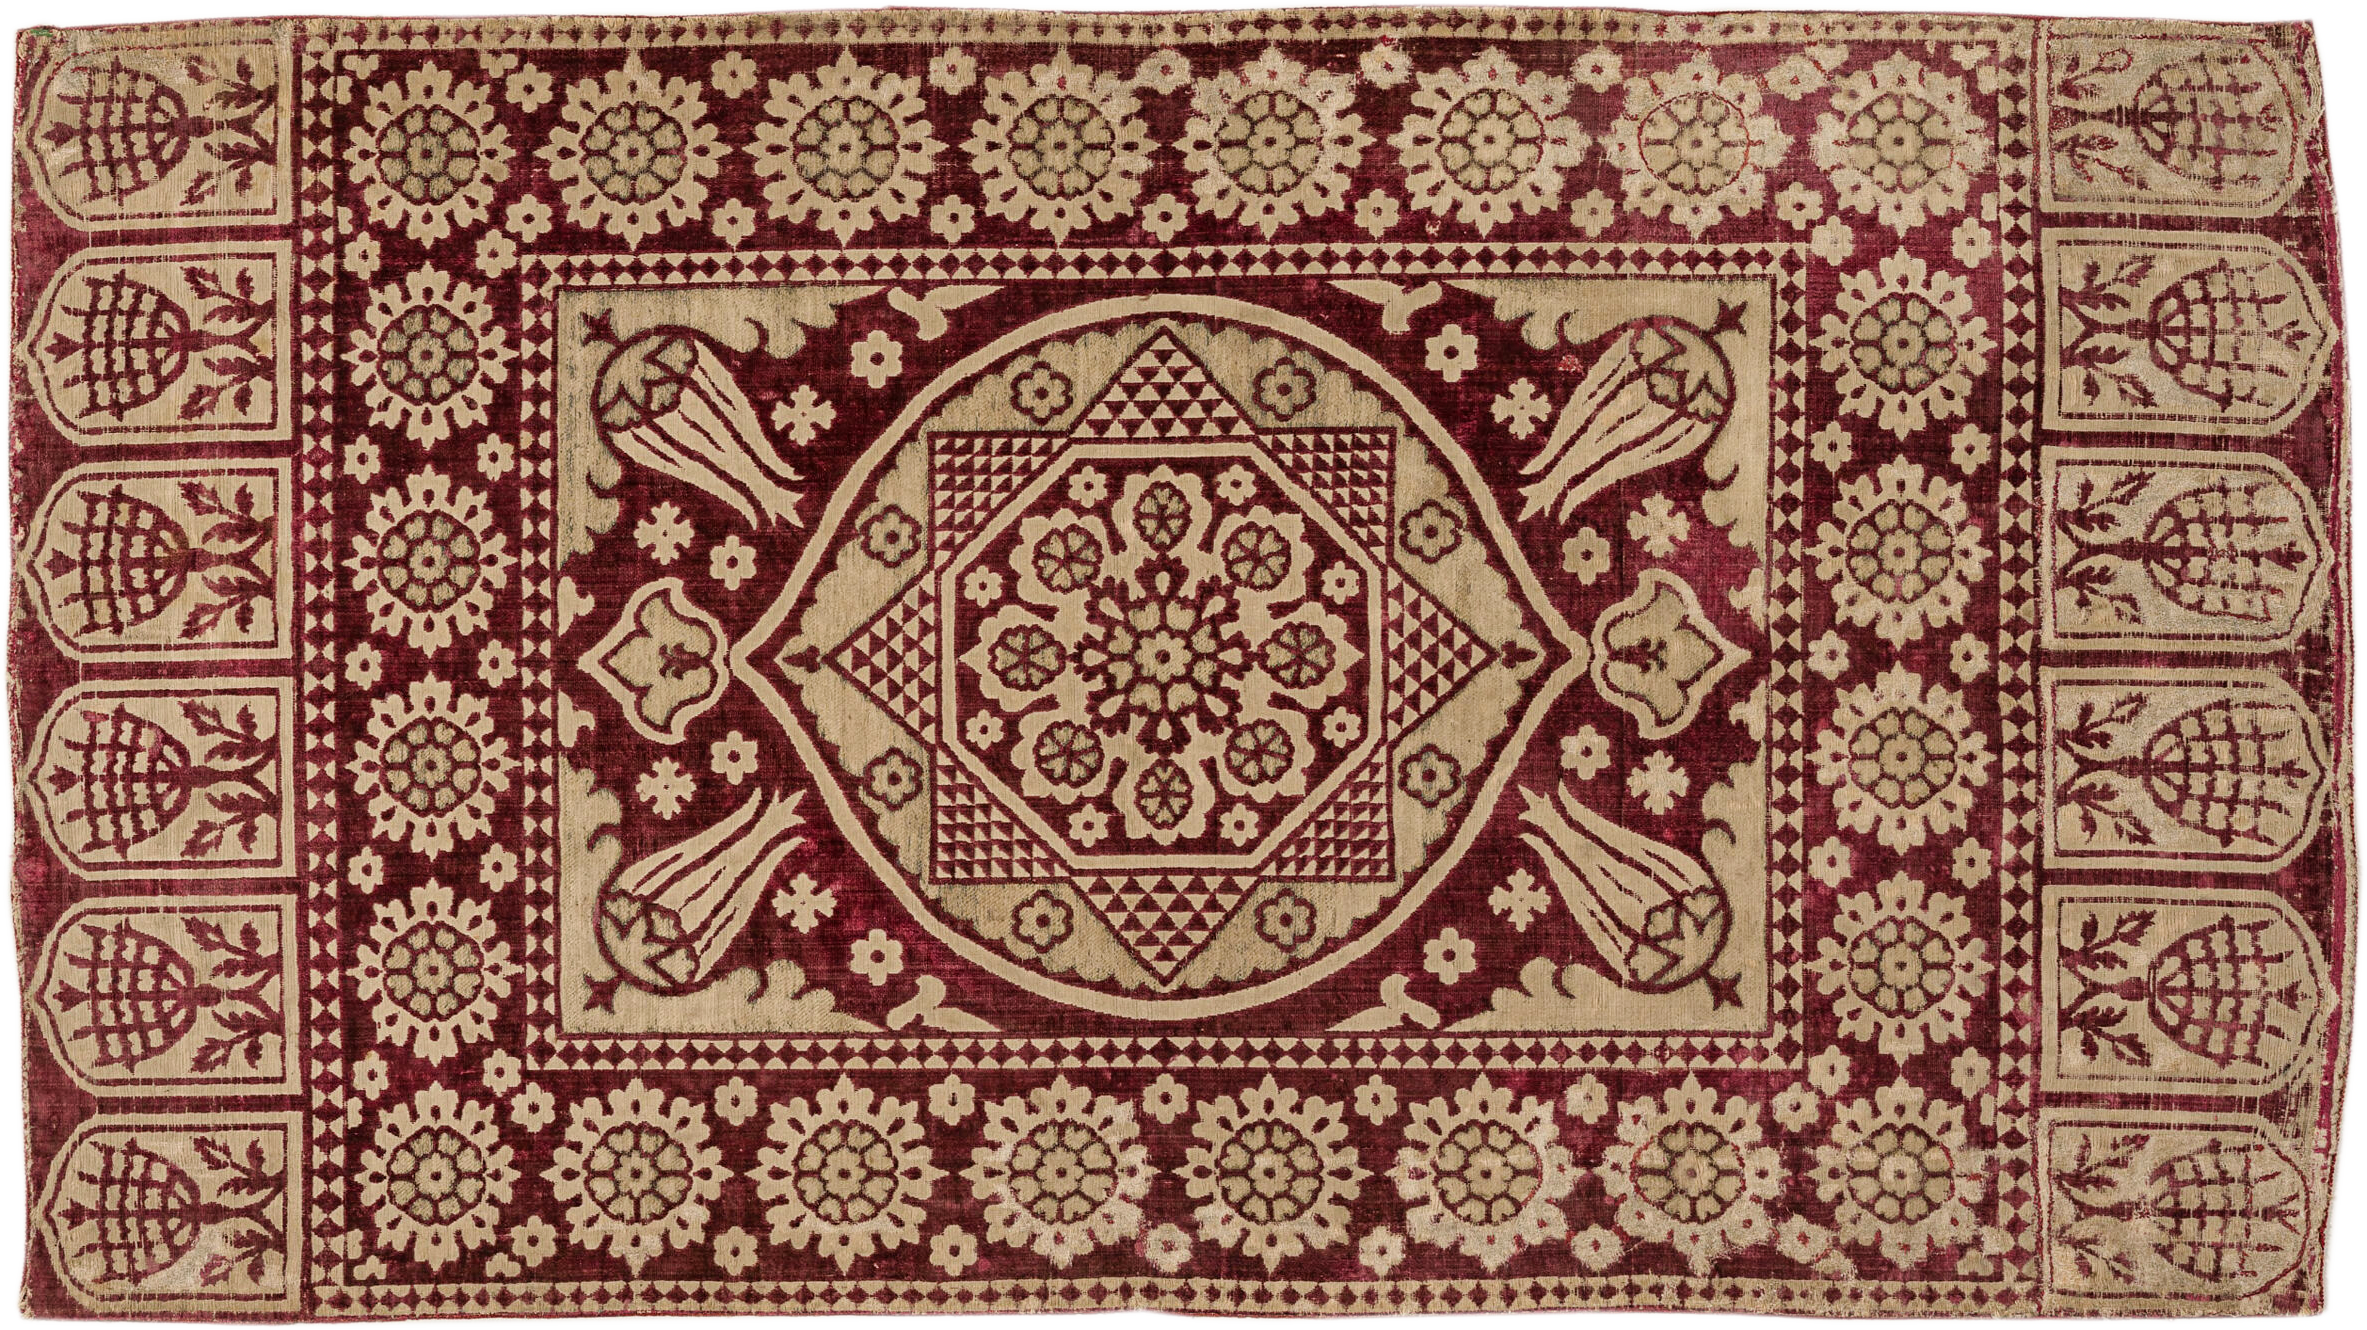 Velvet cushion cover with tulip design from Ottoman Empire.